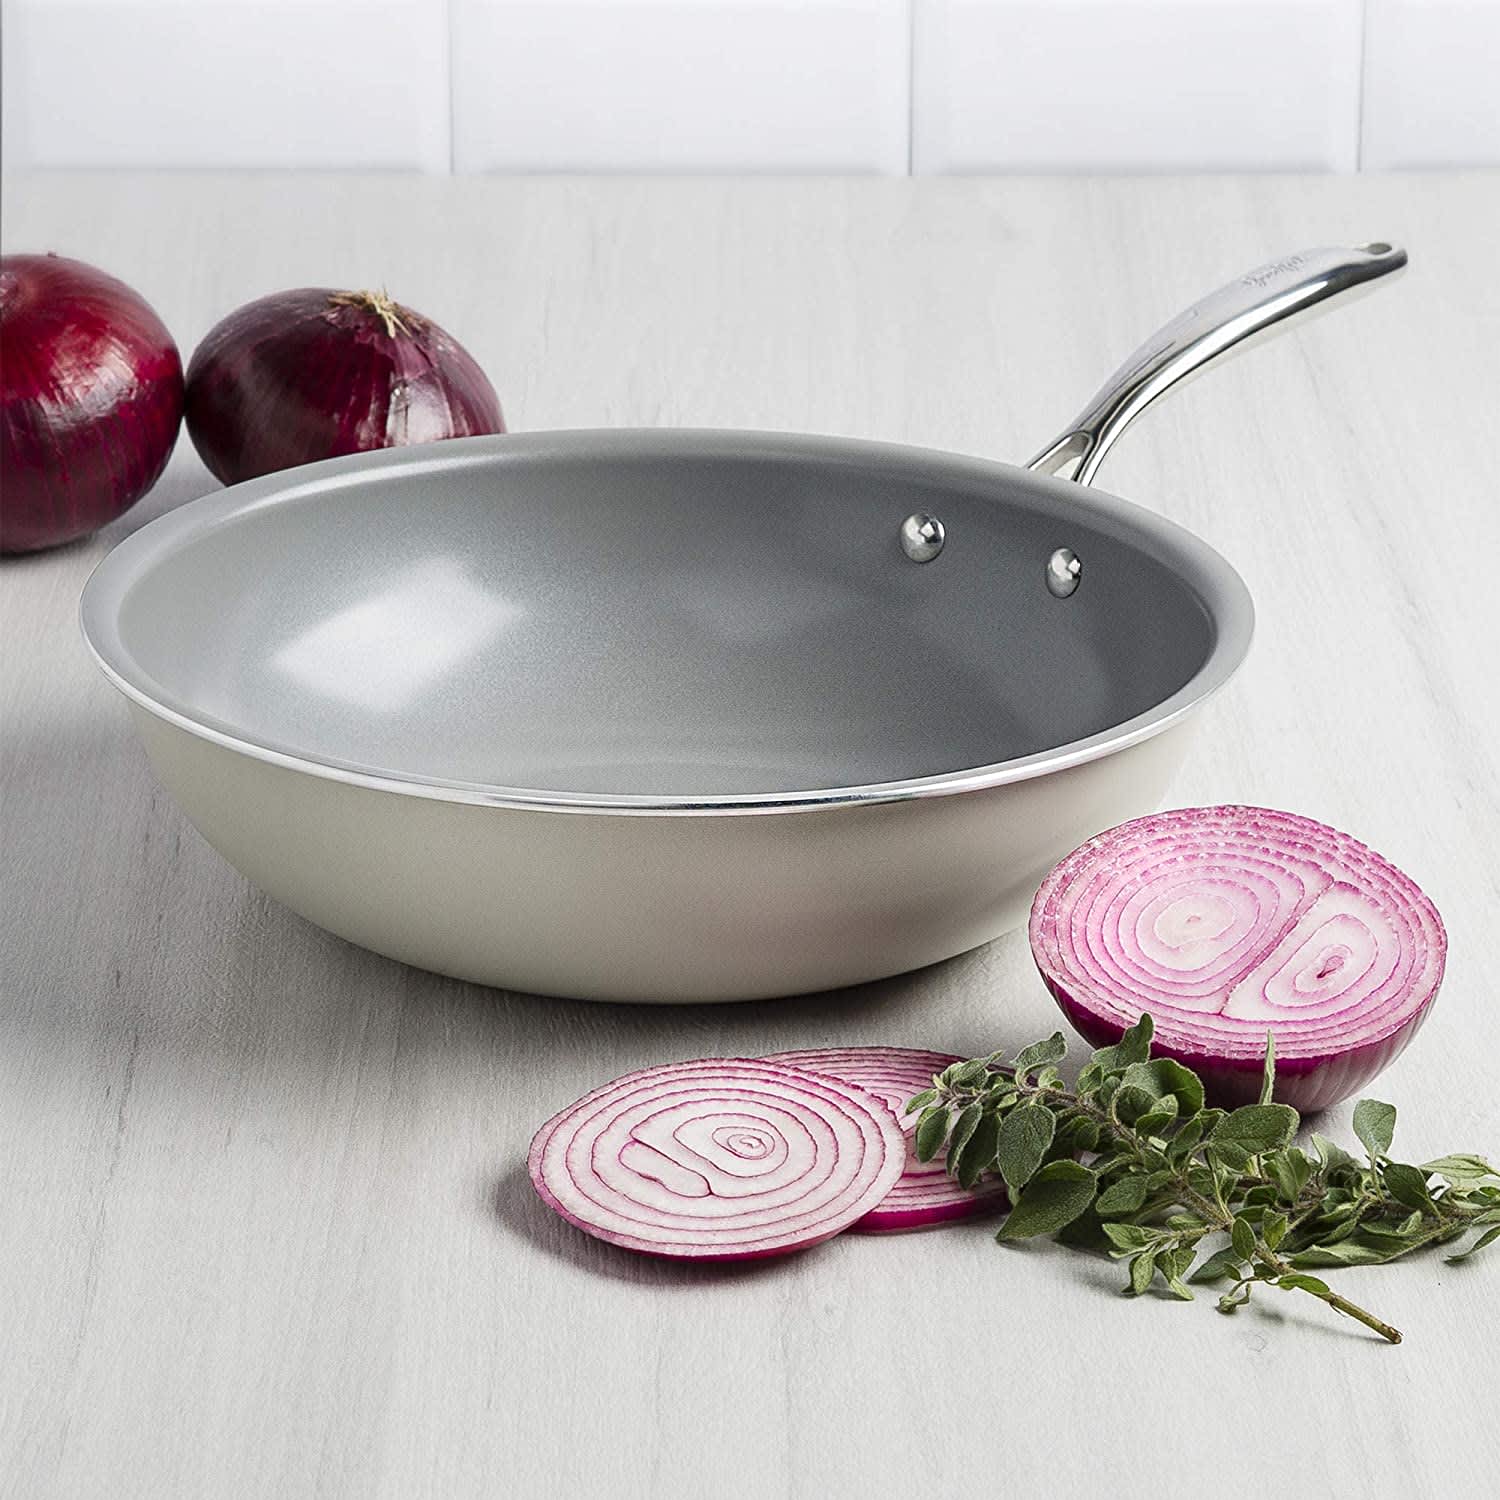 Goodful's Premium Nonstick Cookware Is On Sale Now